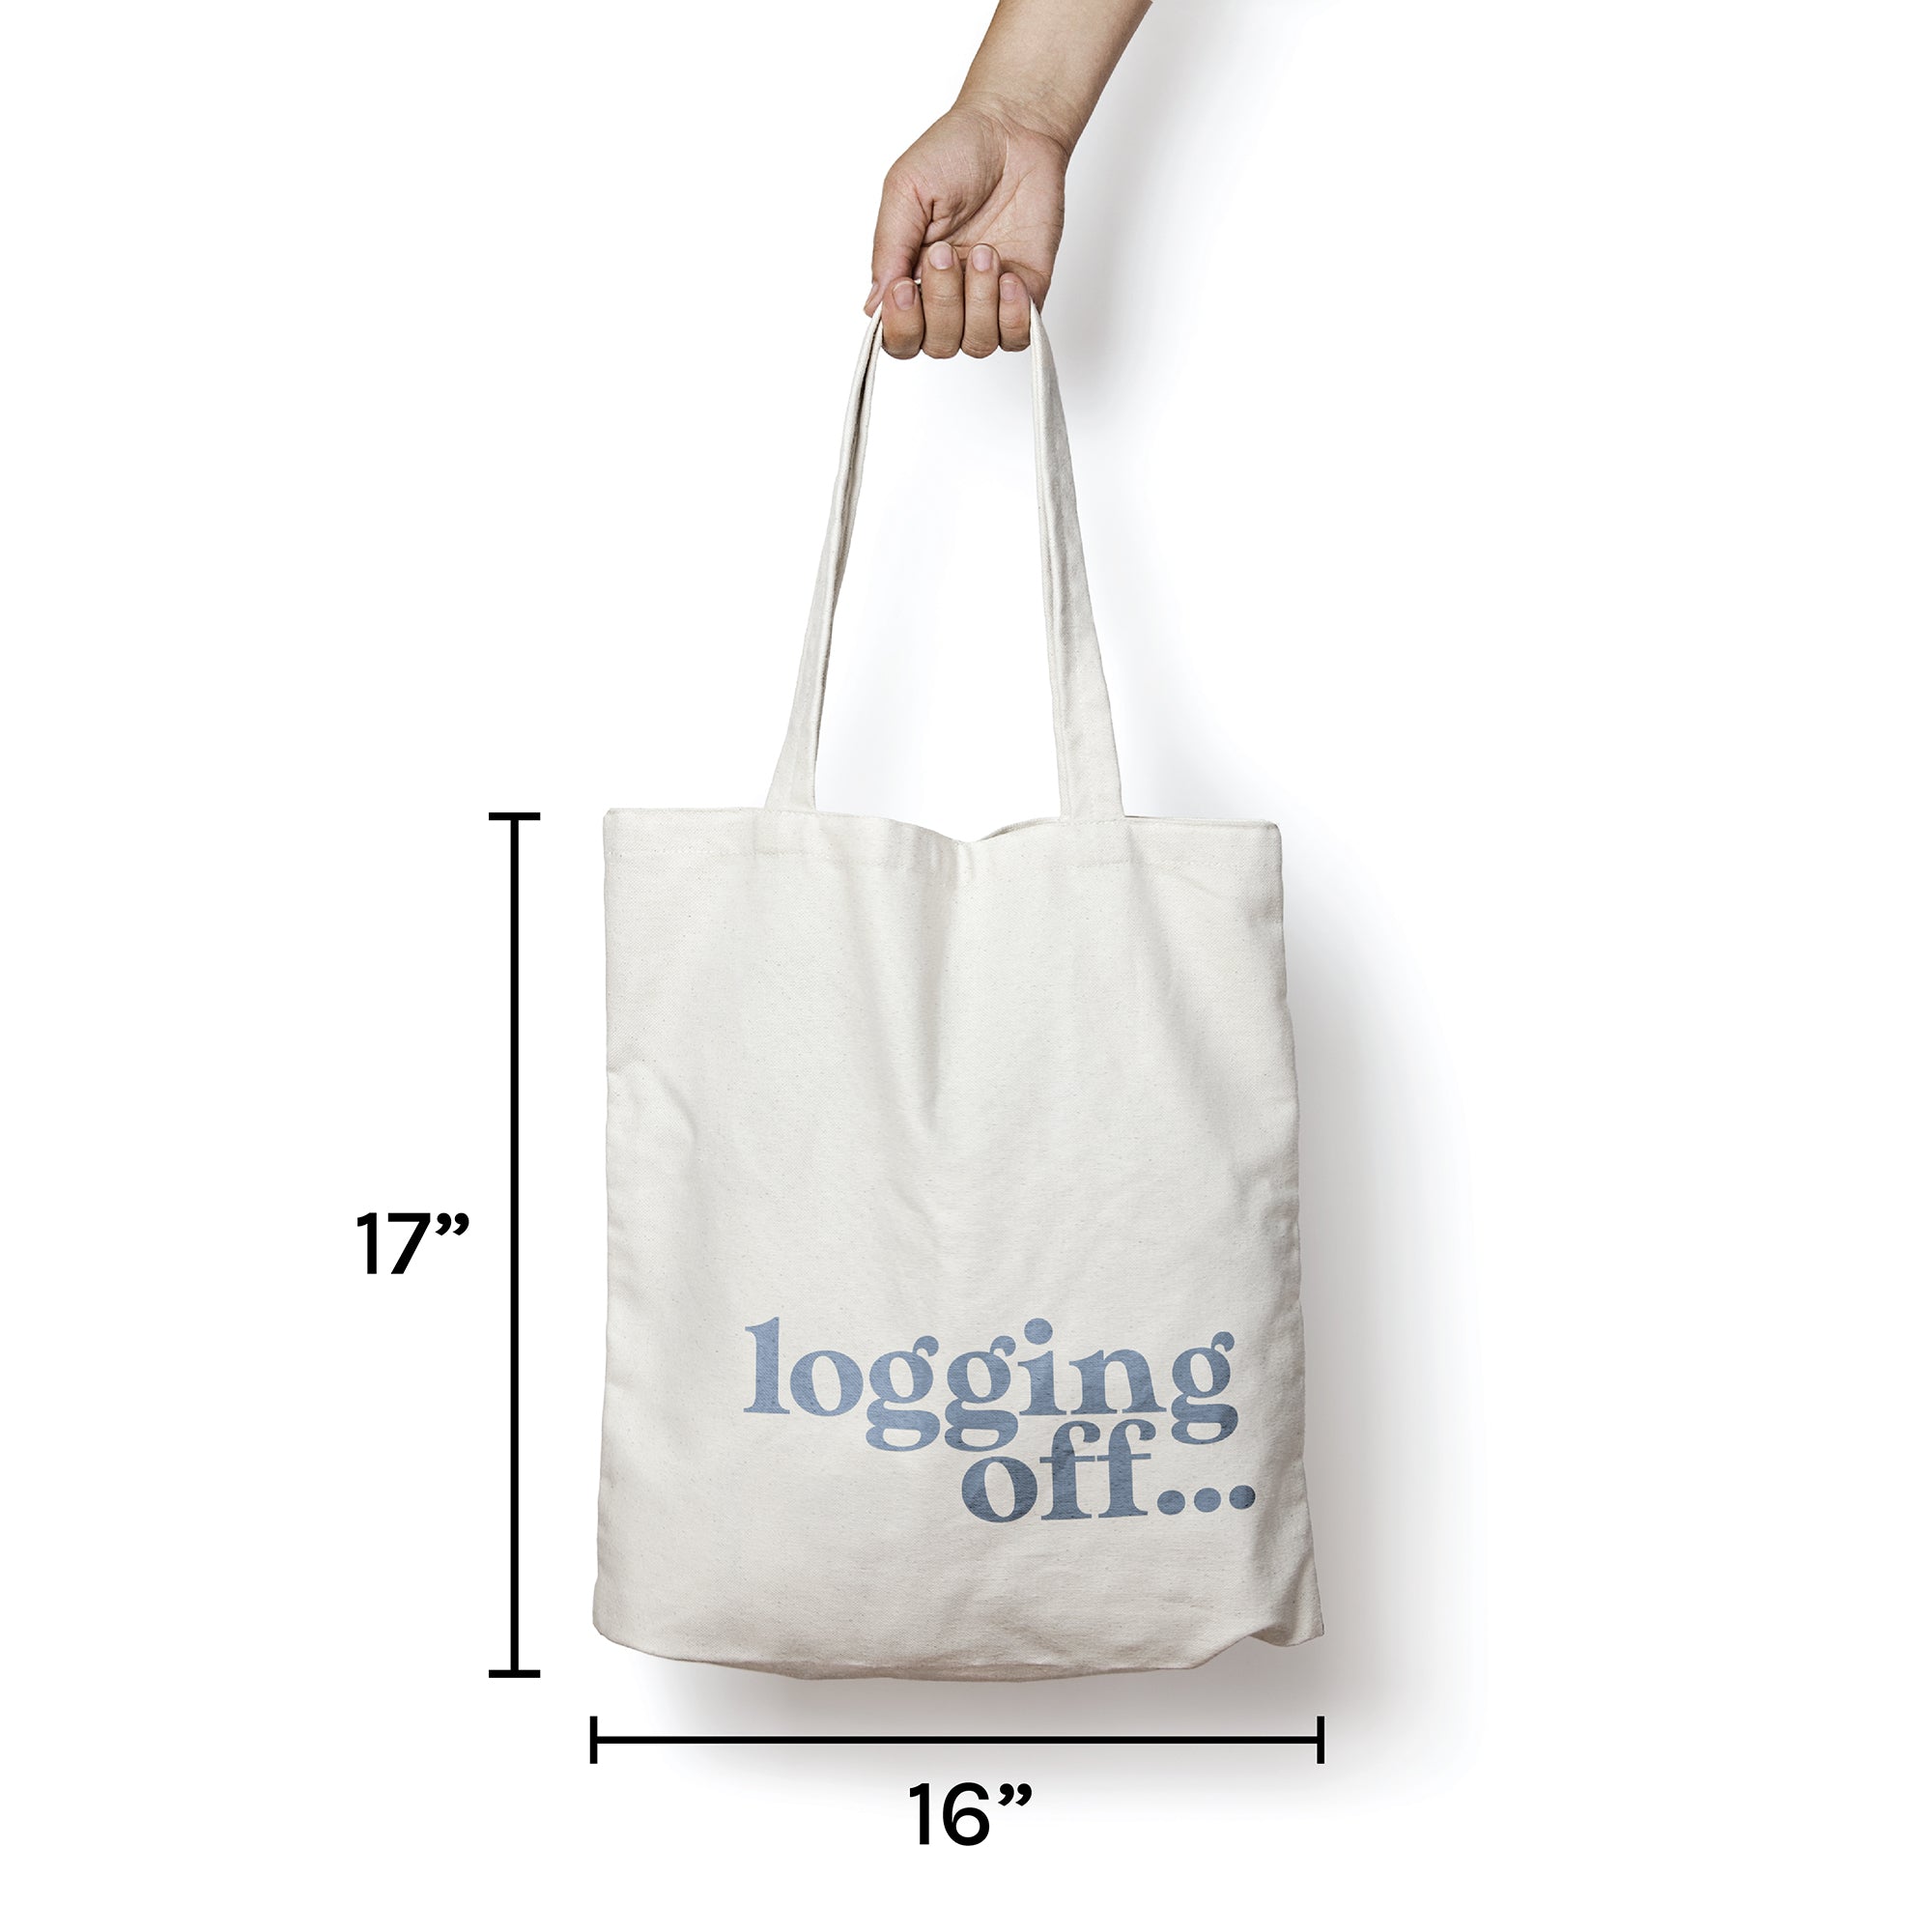 Bugged Out stringbean recycled cotton canvas tote bag